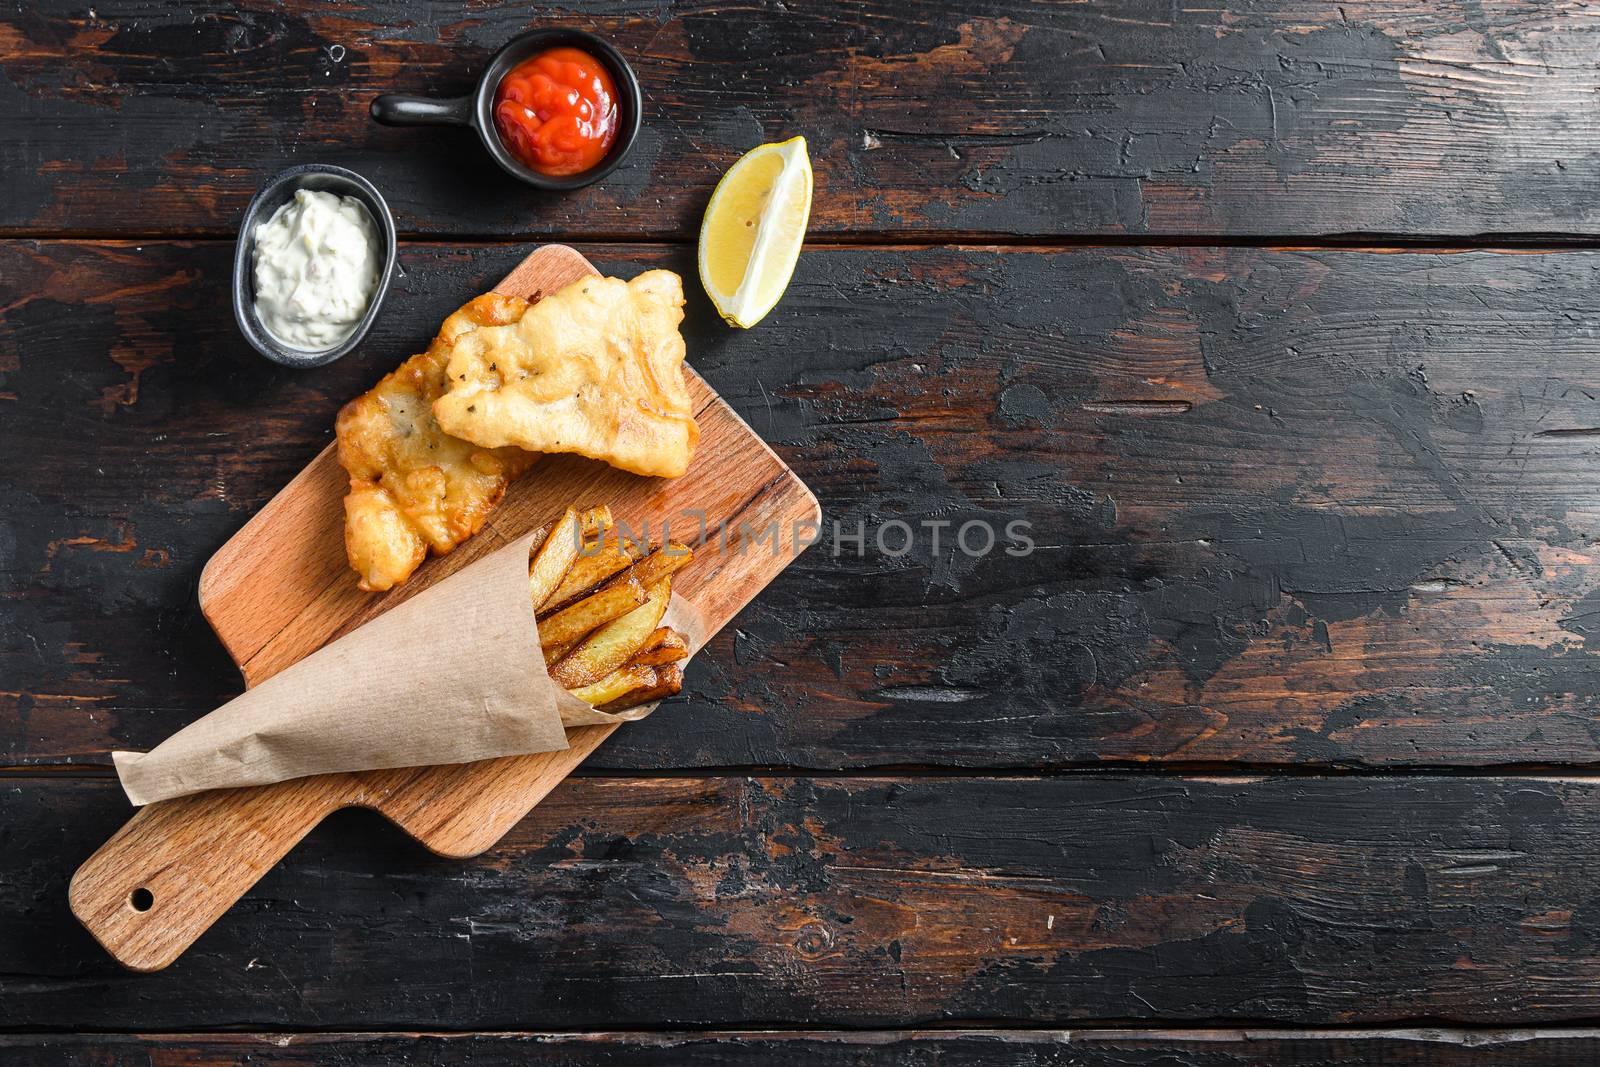 Fish and chips in a paper cone on wood chopping board dip and lemon - fried cod, french fries, lemon slices, tartar sauce, ketchup tomatoe and with mushy peas served in the Pub or Restaurant over old wooden planks dark table top view space for text or recipe